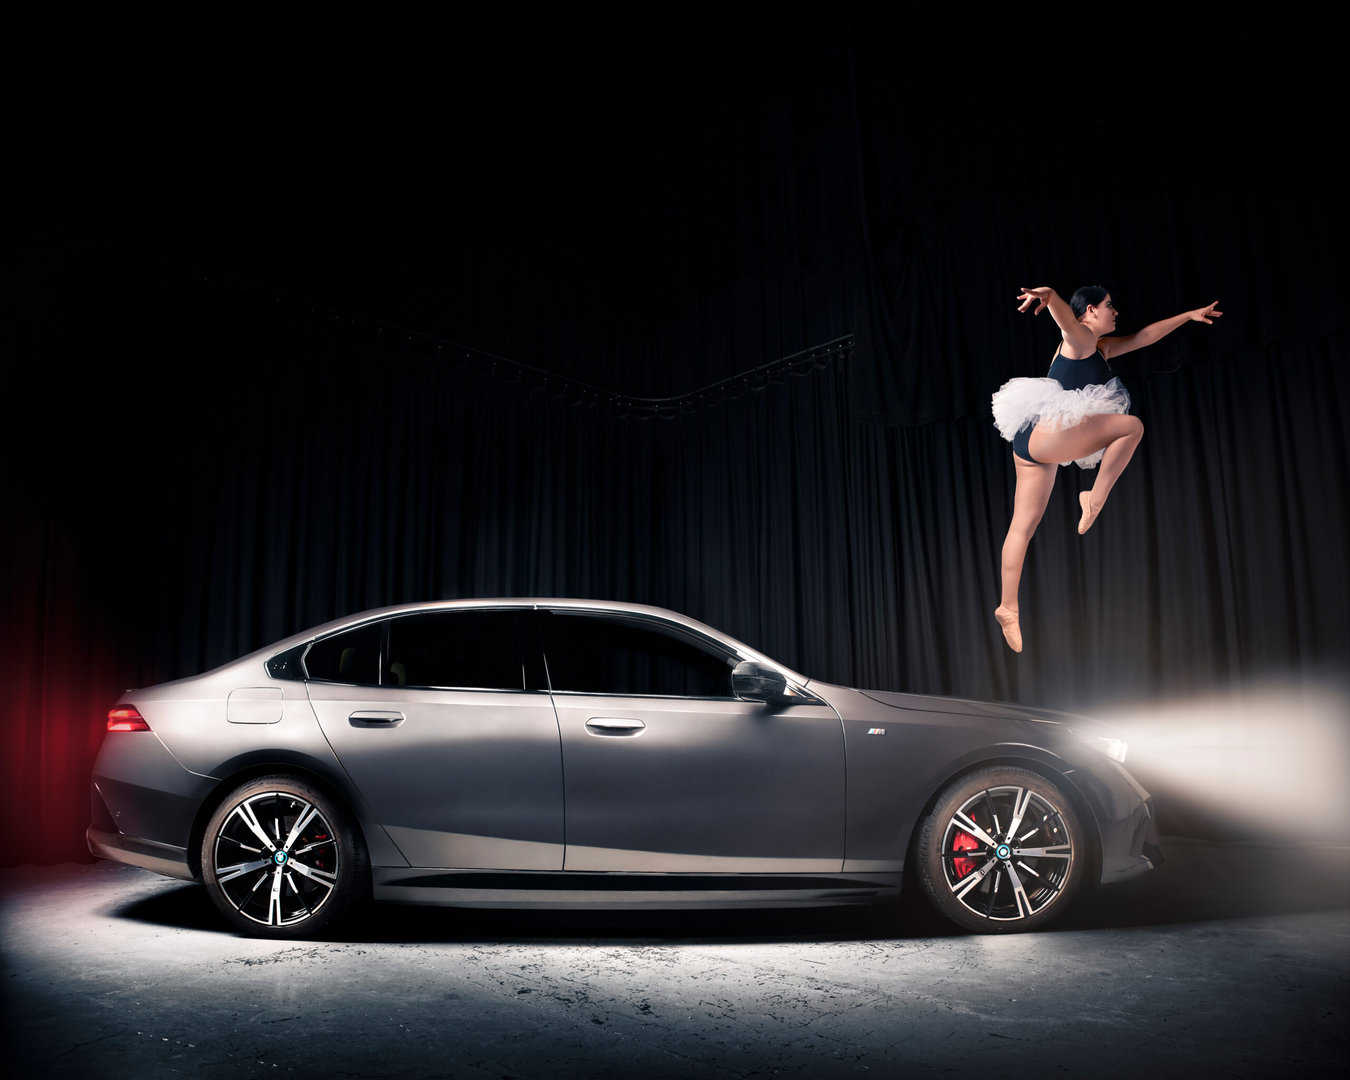 Dancer leaping off the BMW i5.